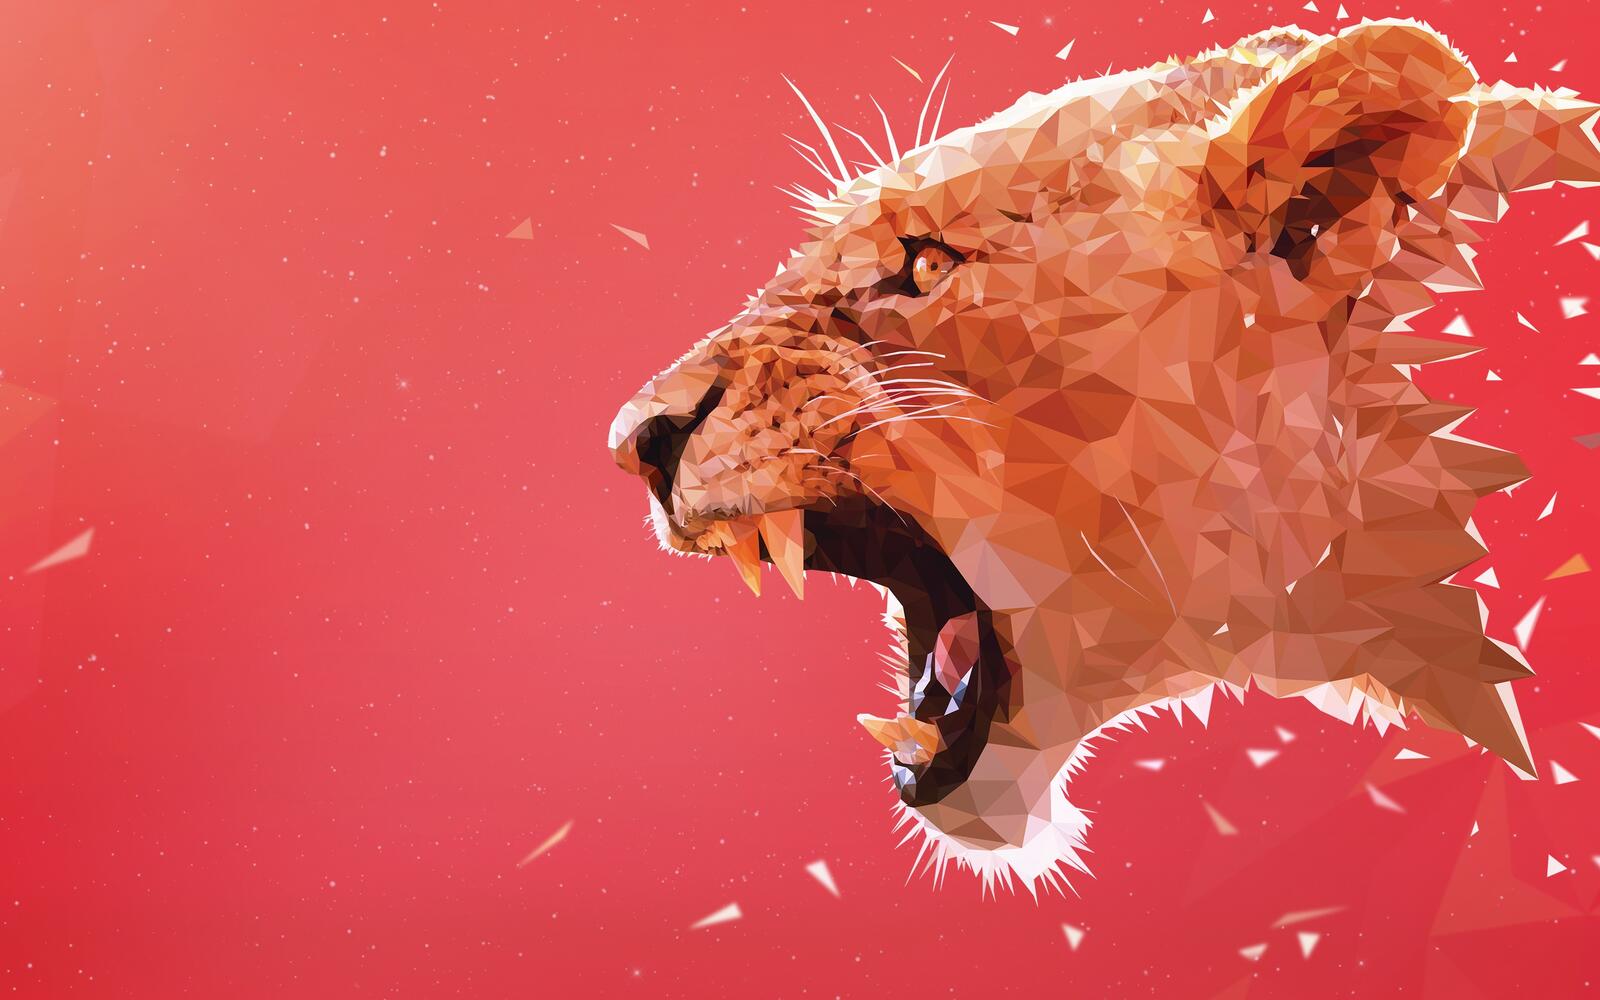 Wallpapers tiger roaring low poly on the desktop